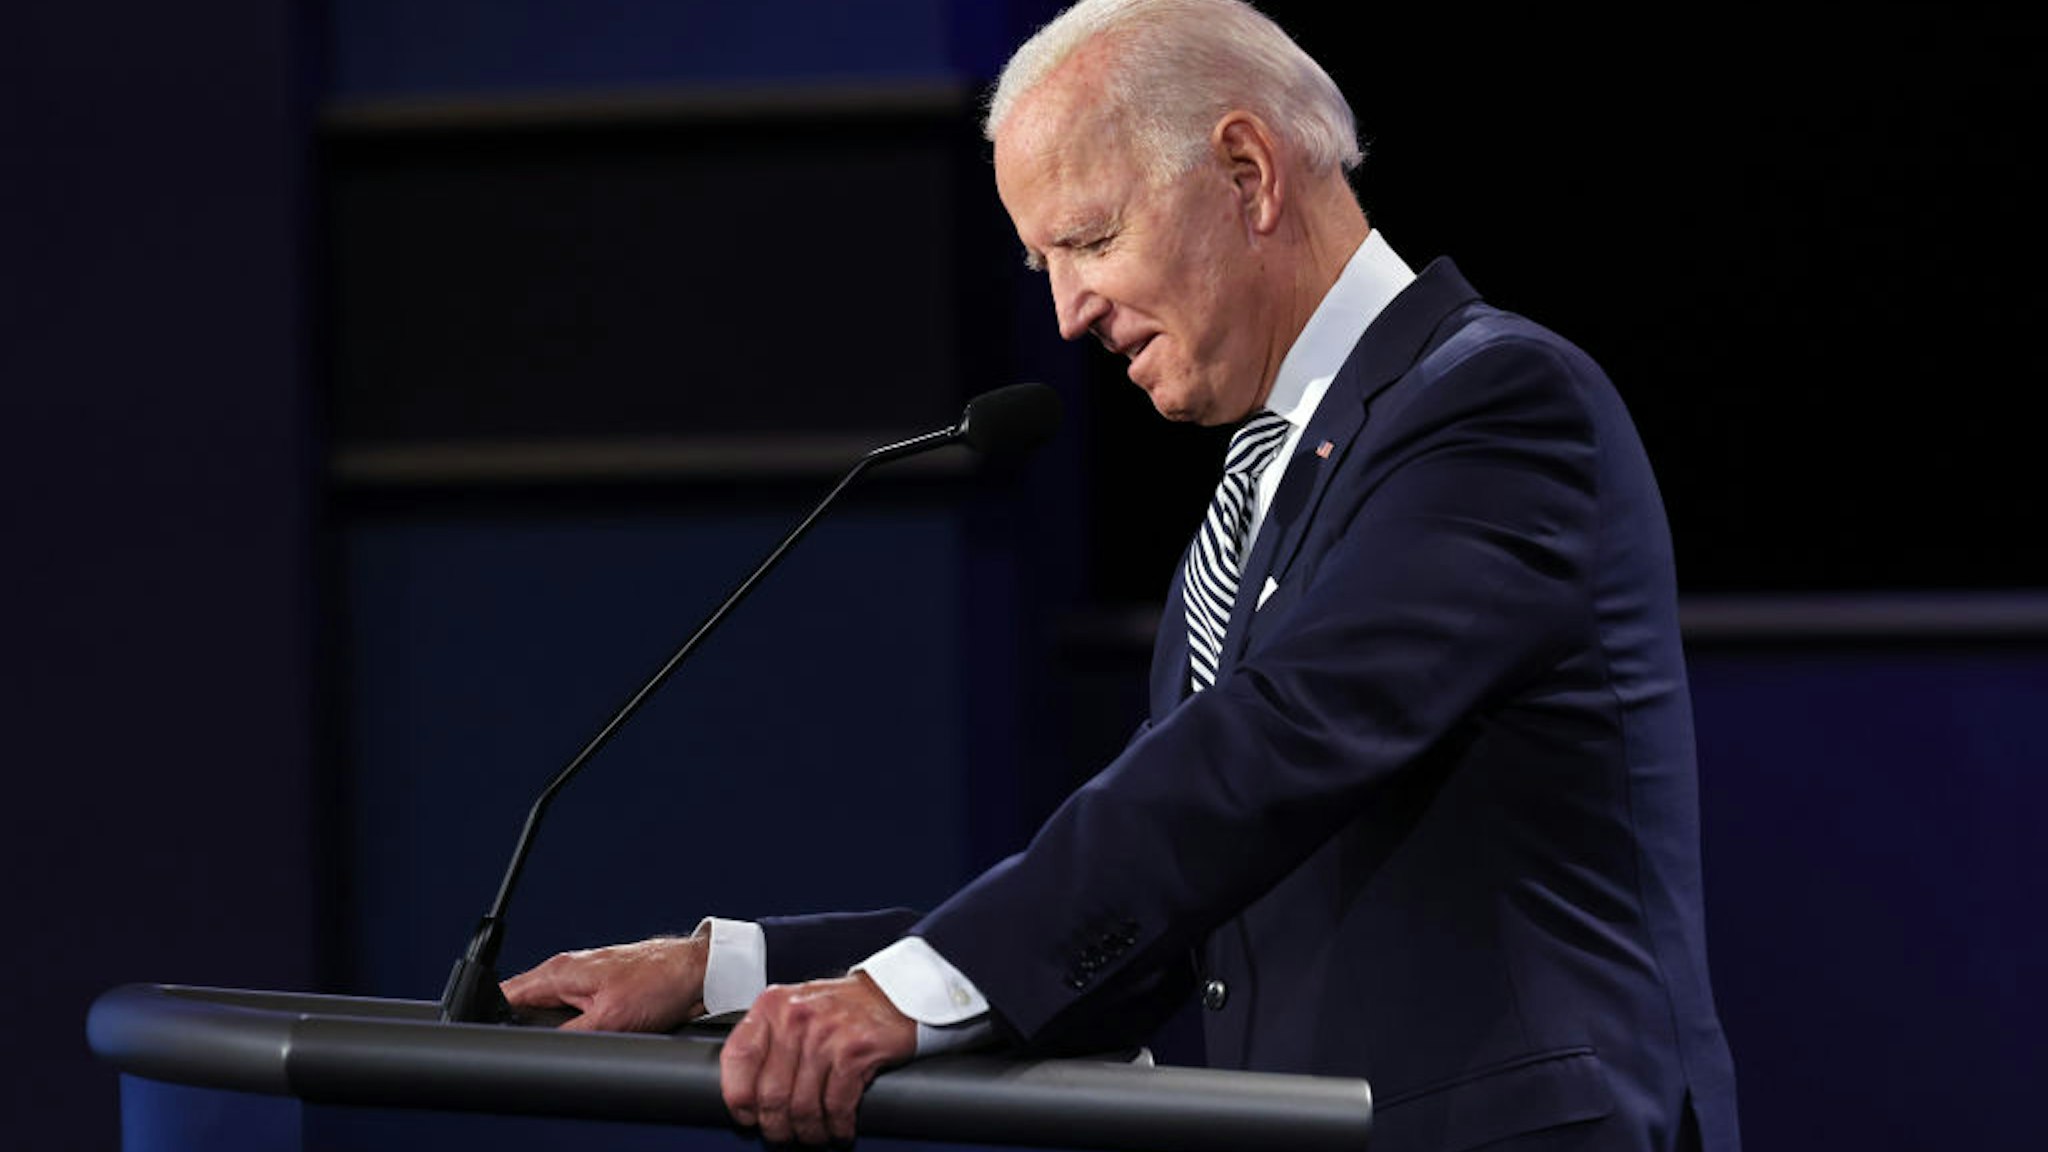 Democratic presidential nominee Joe Biden participates in the first presidential debate against U.S. President Donald Trump at the Health Education Campus of Case Western Reserve University on September 29, 2020 in Cleveland, Ohio.